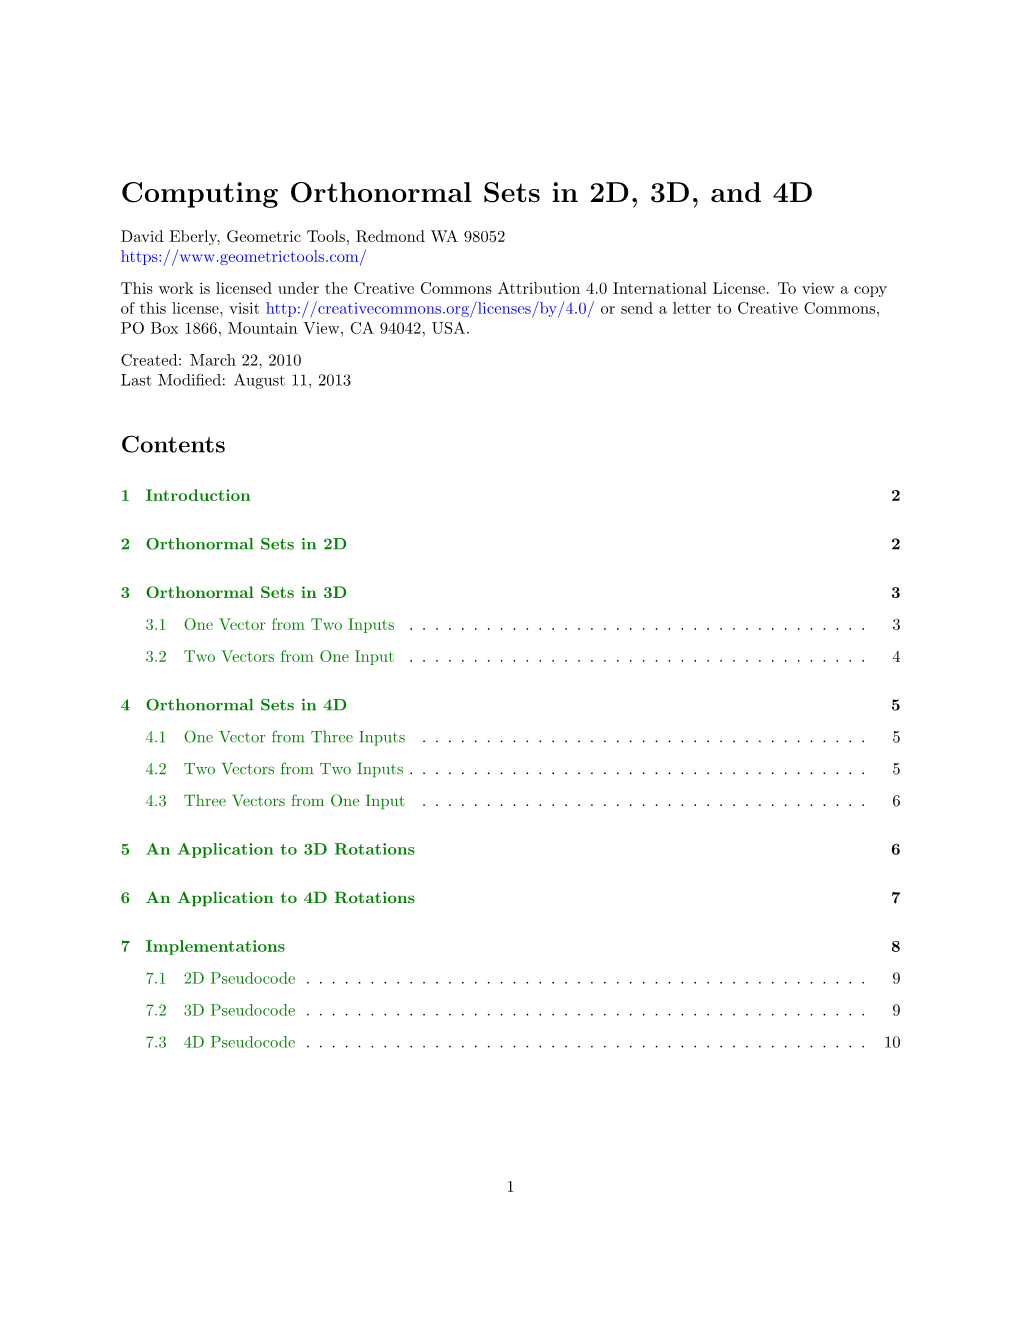 Computing Orthonormal Sets in 2D, 3D, and 4D